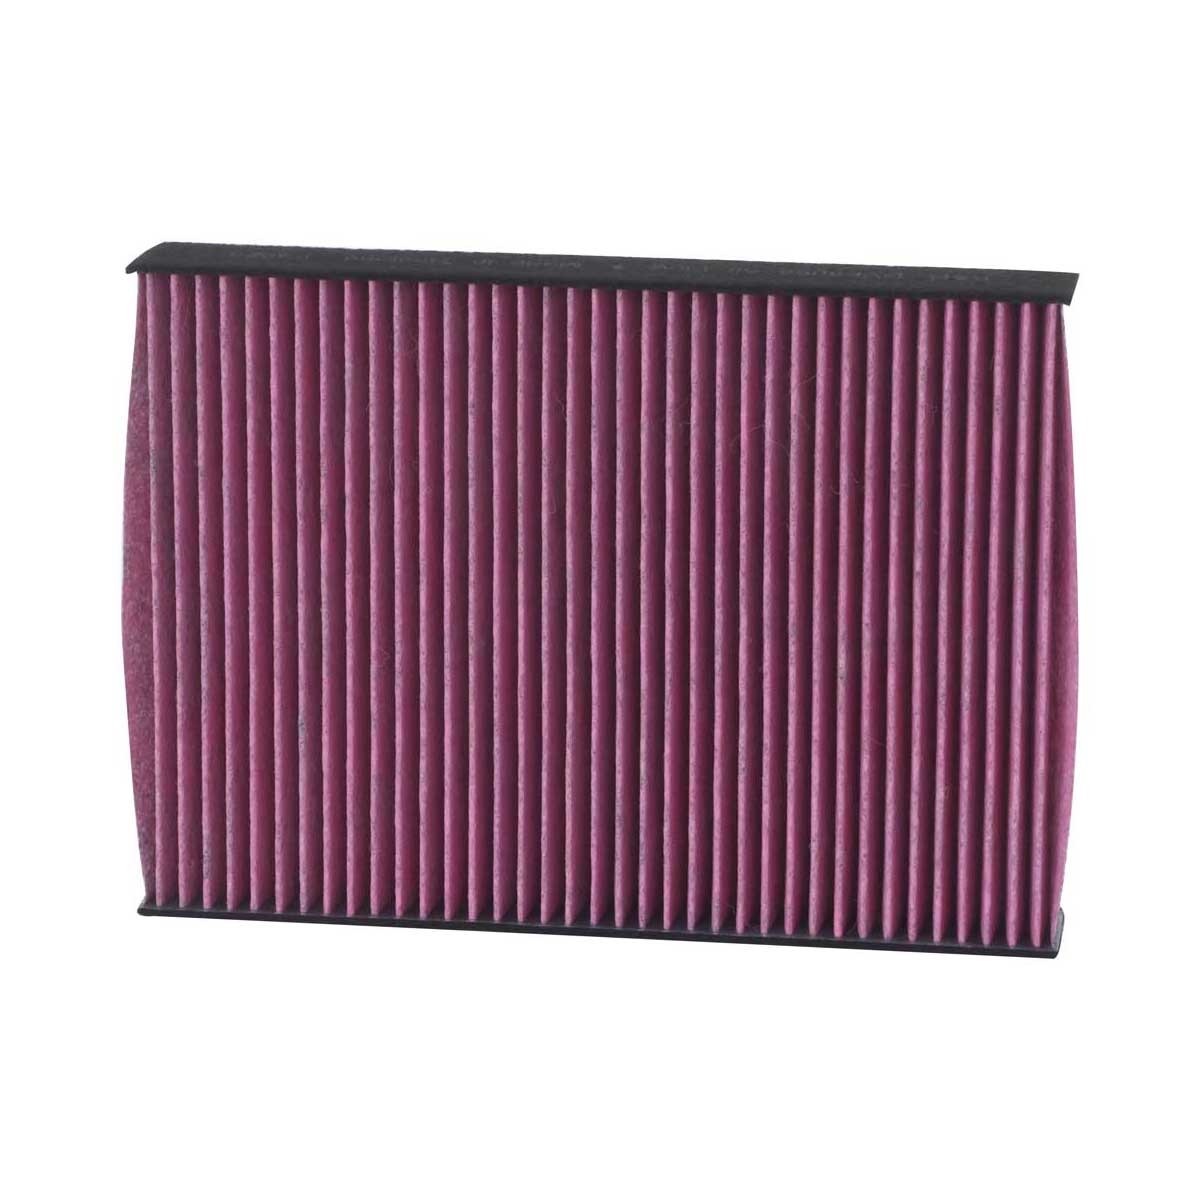 Original K&N Filters Air conditioner filter DVF5063 for MERCEDES-BENZ C-Class